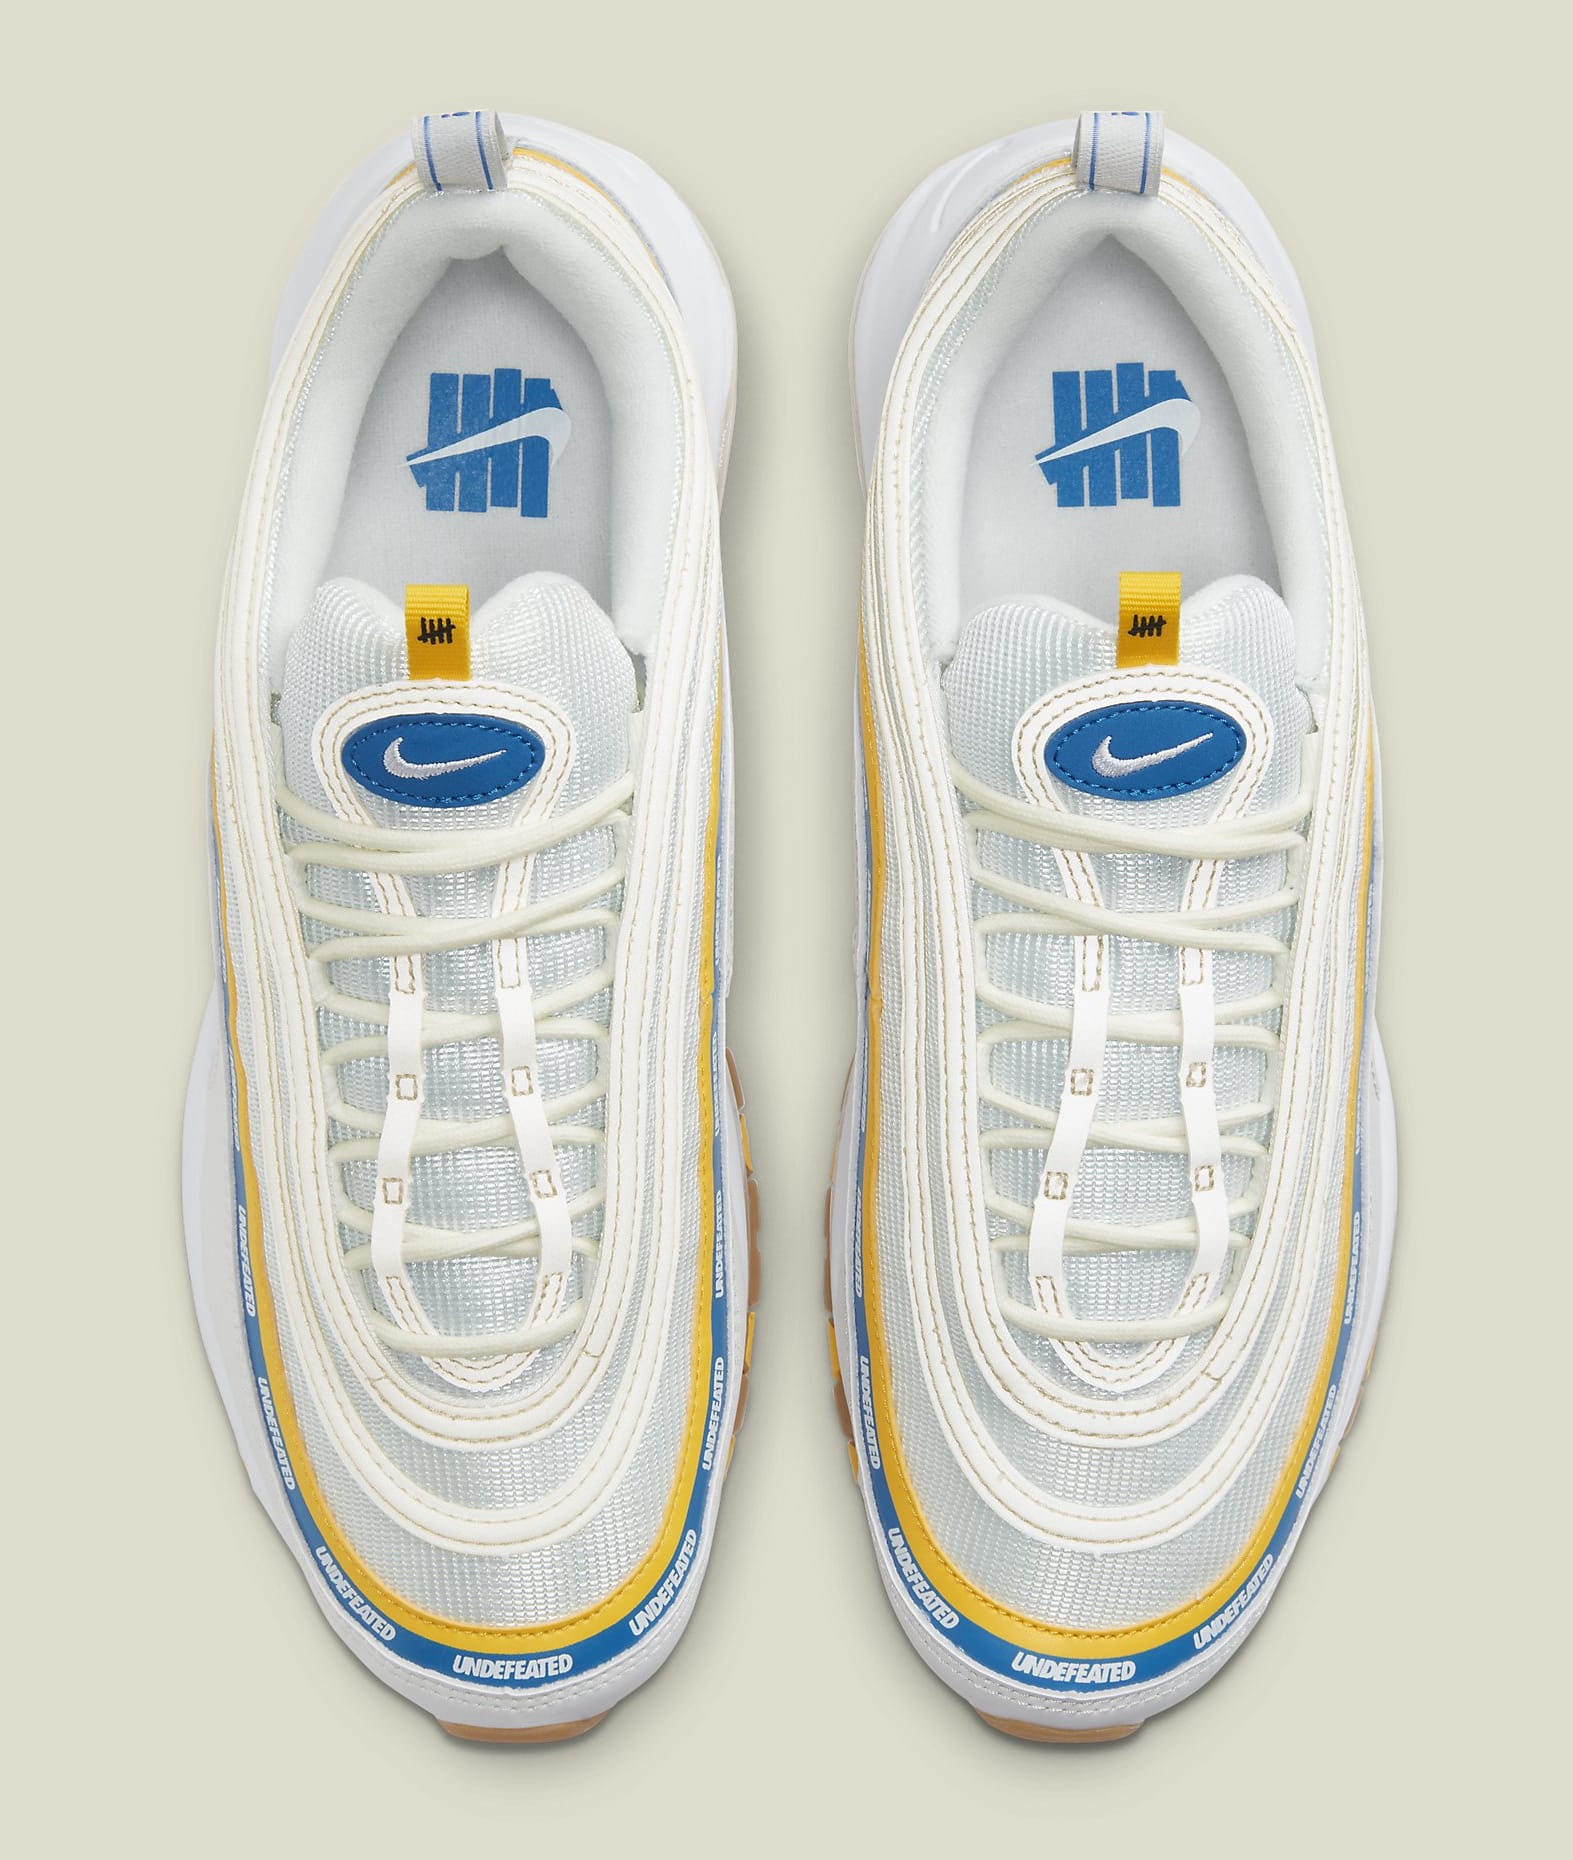 A Third Undefeated x Nike Air Max 97 Surfaces | Complex